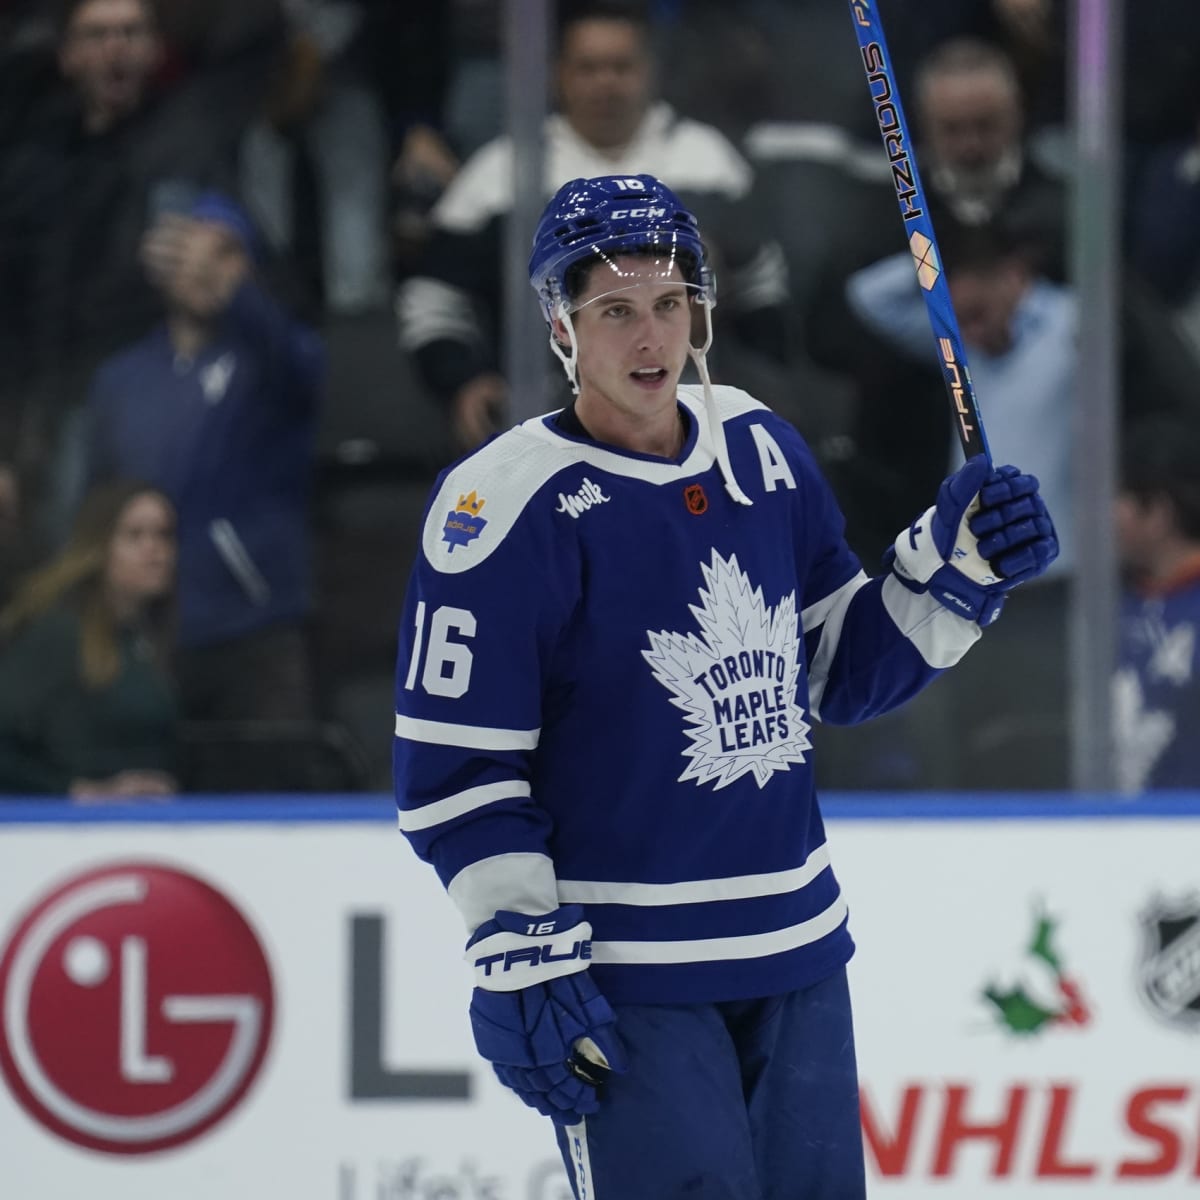 Maple Leafs Practice: Mitch Marner - September 25, 2018 